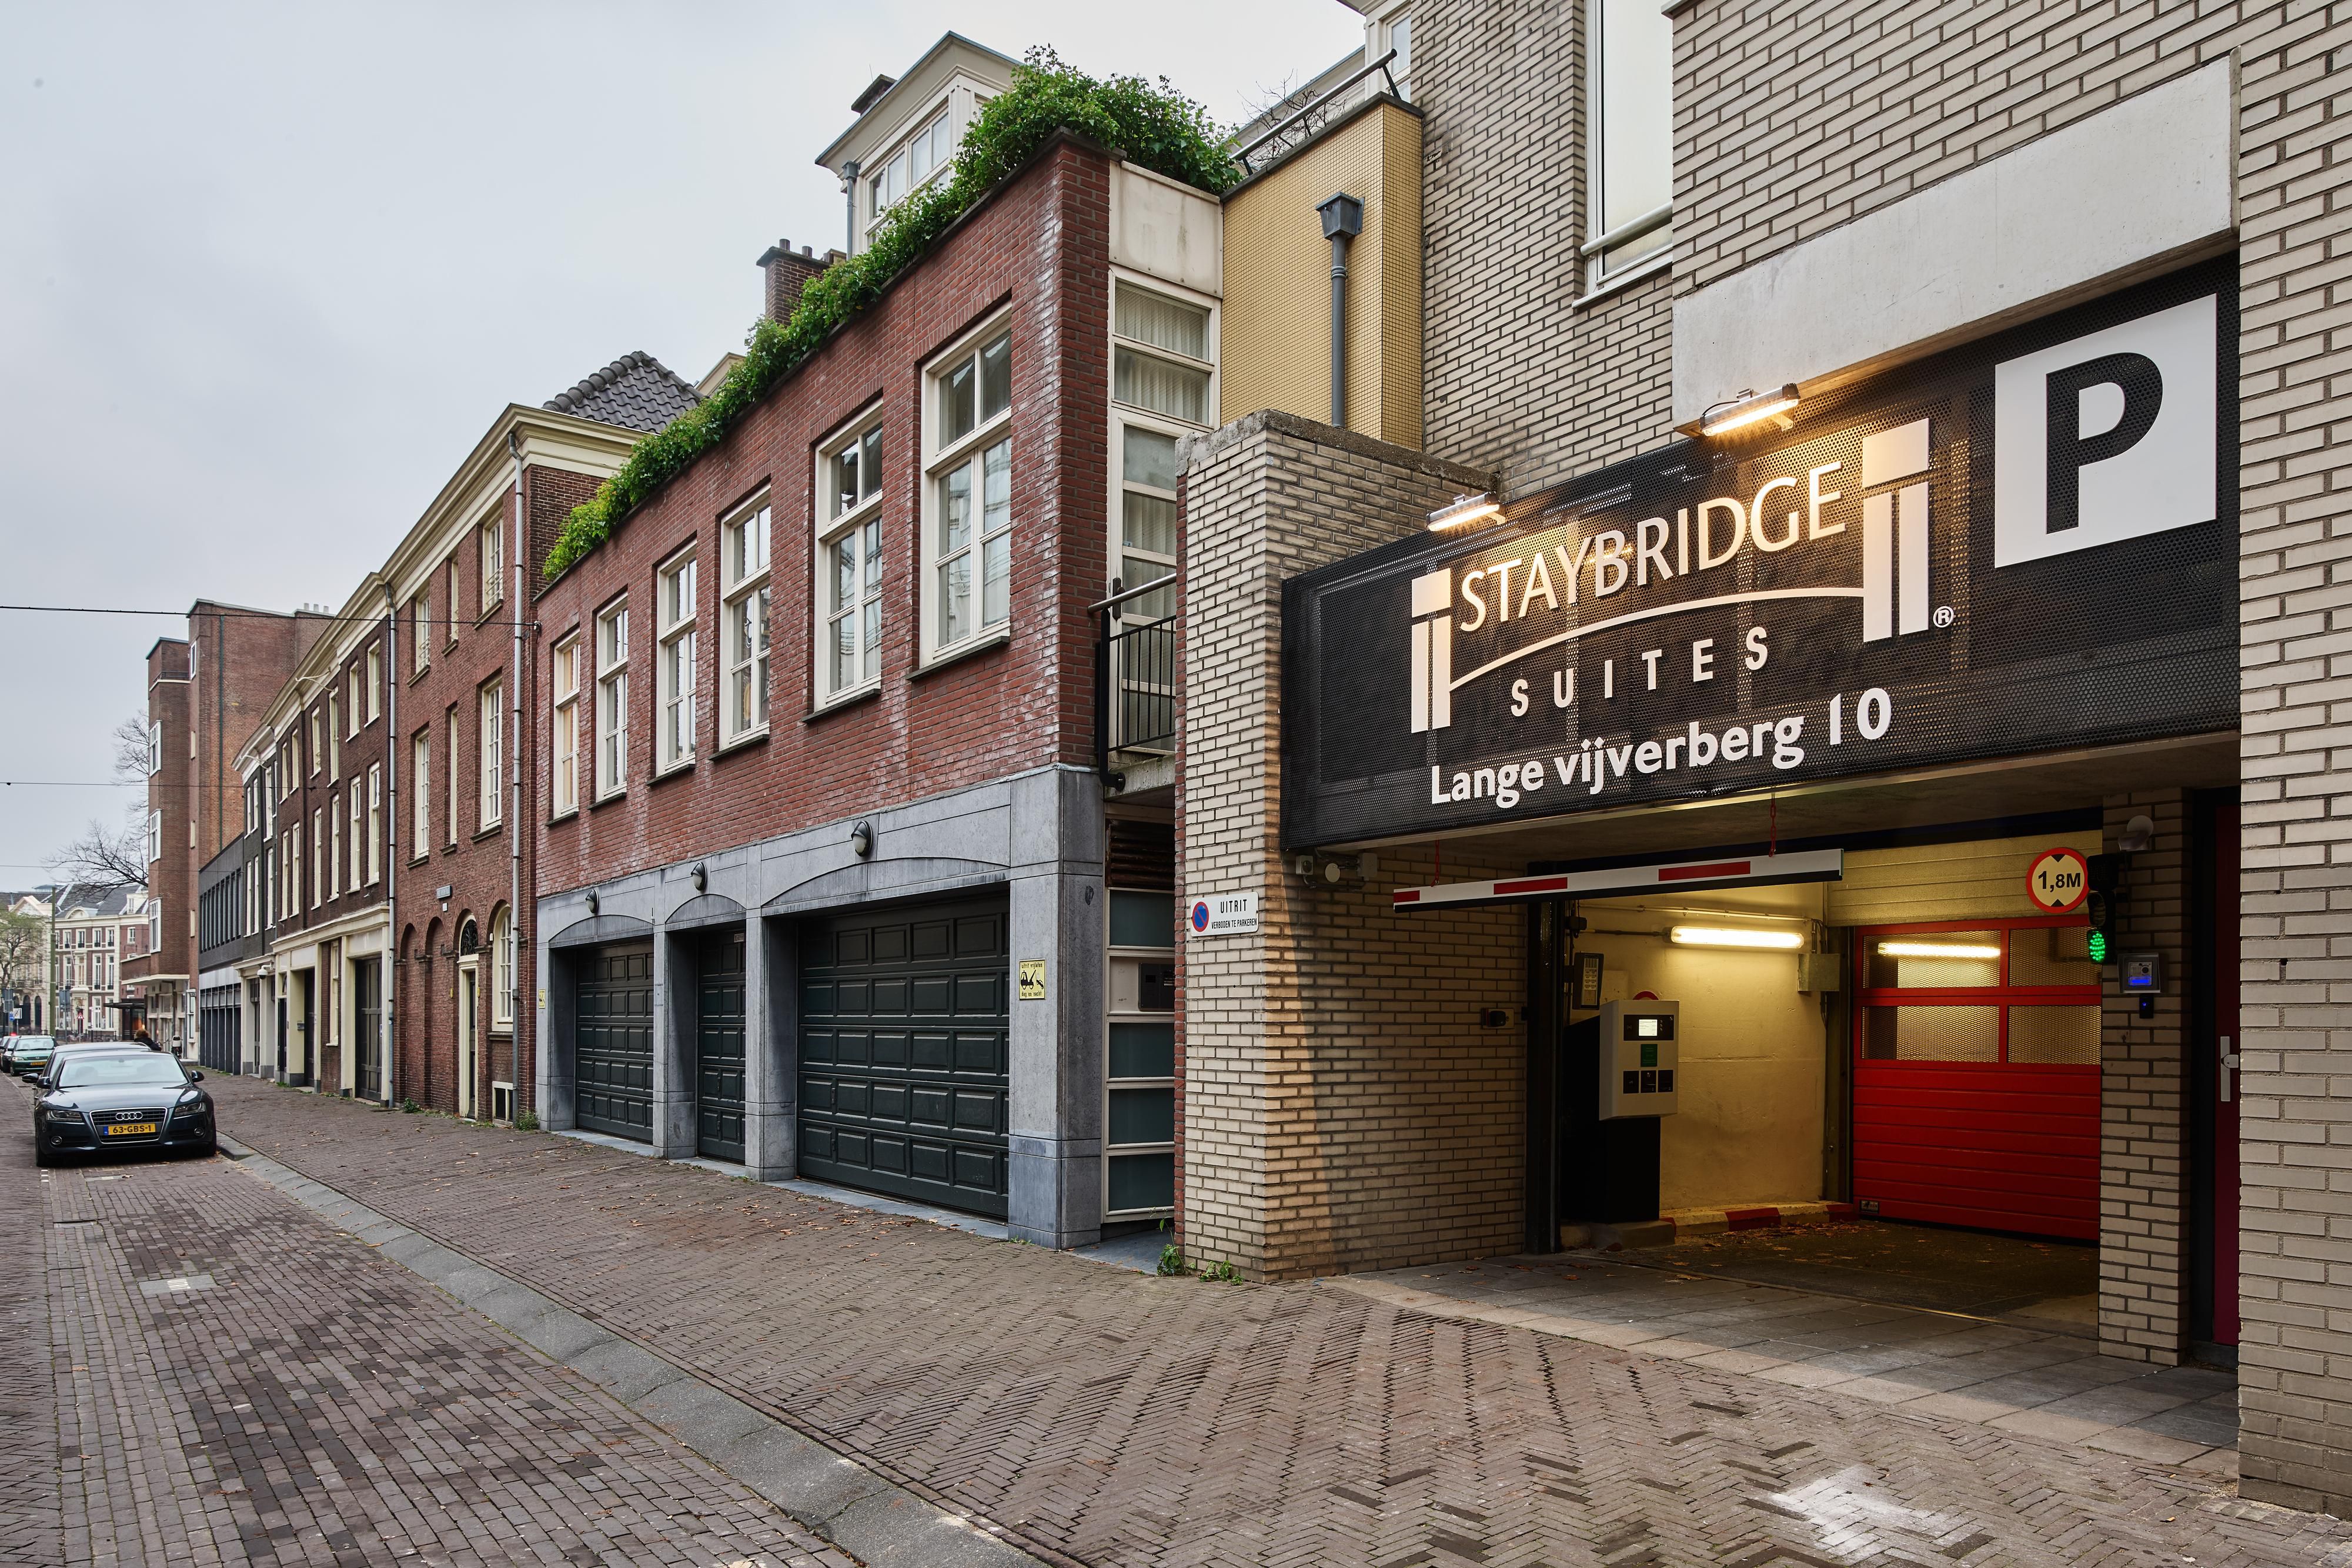 We have a private parking garage, accessible via the backside of the hotel. Set your navigation to Hoge Nieuwstraat 19. A parking spot is subject to availability upon arrival and cannot be reserved in advance, unless you book one of our packages that has parking included. Parking costs are 27,50 EUR per night. The parking height is 1.80 meters.